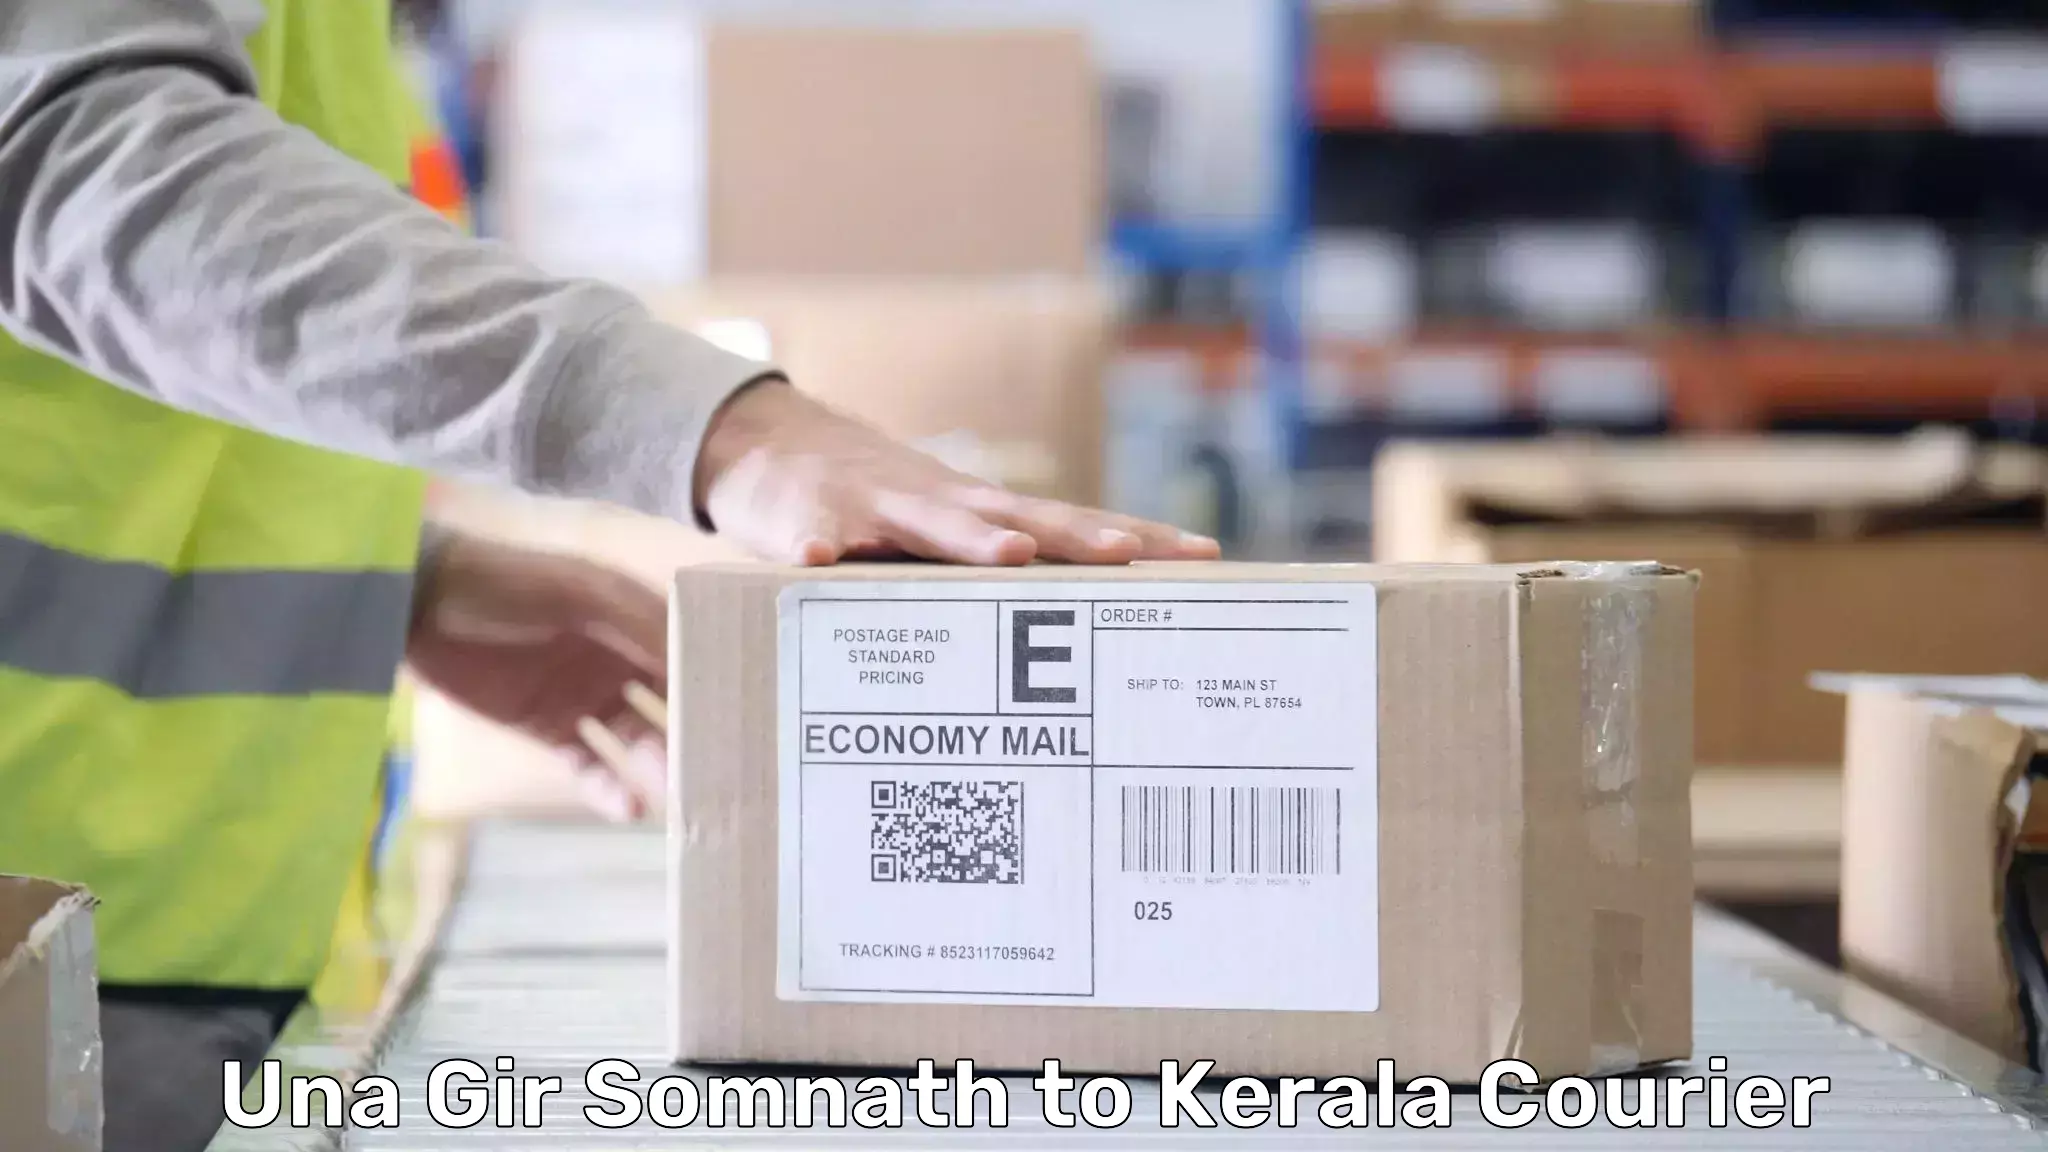 Reliable luggage courier Una Gir Somnath to Kochi